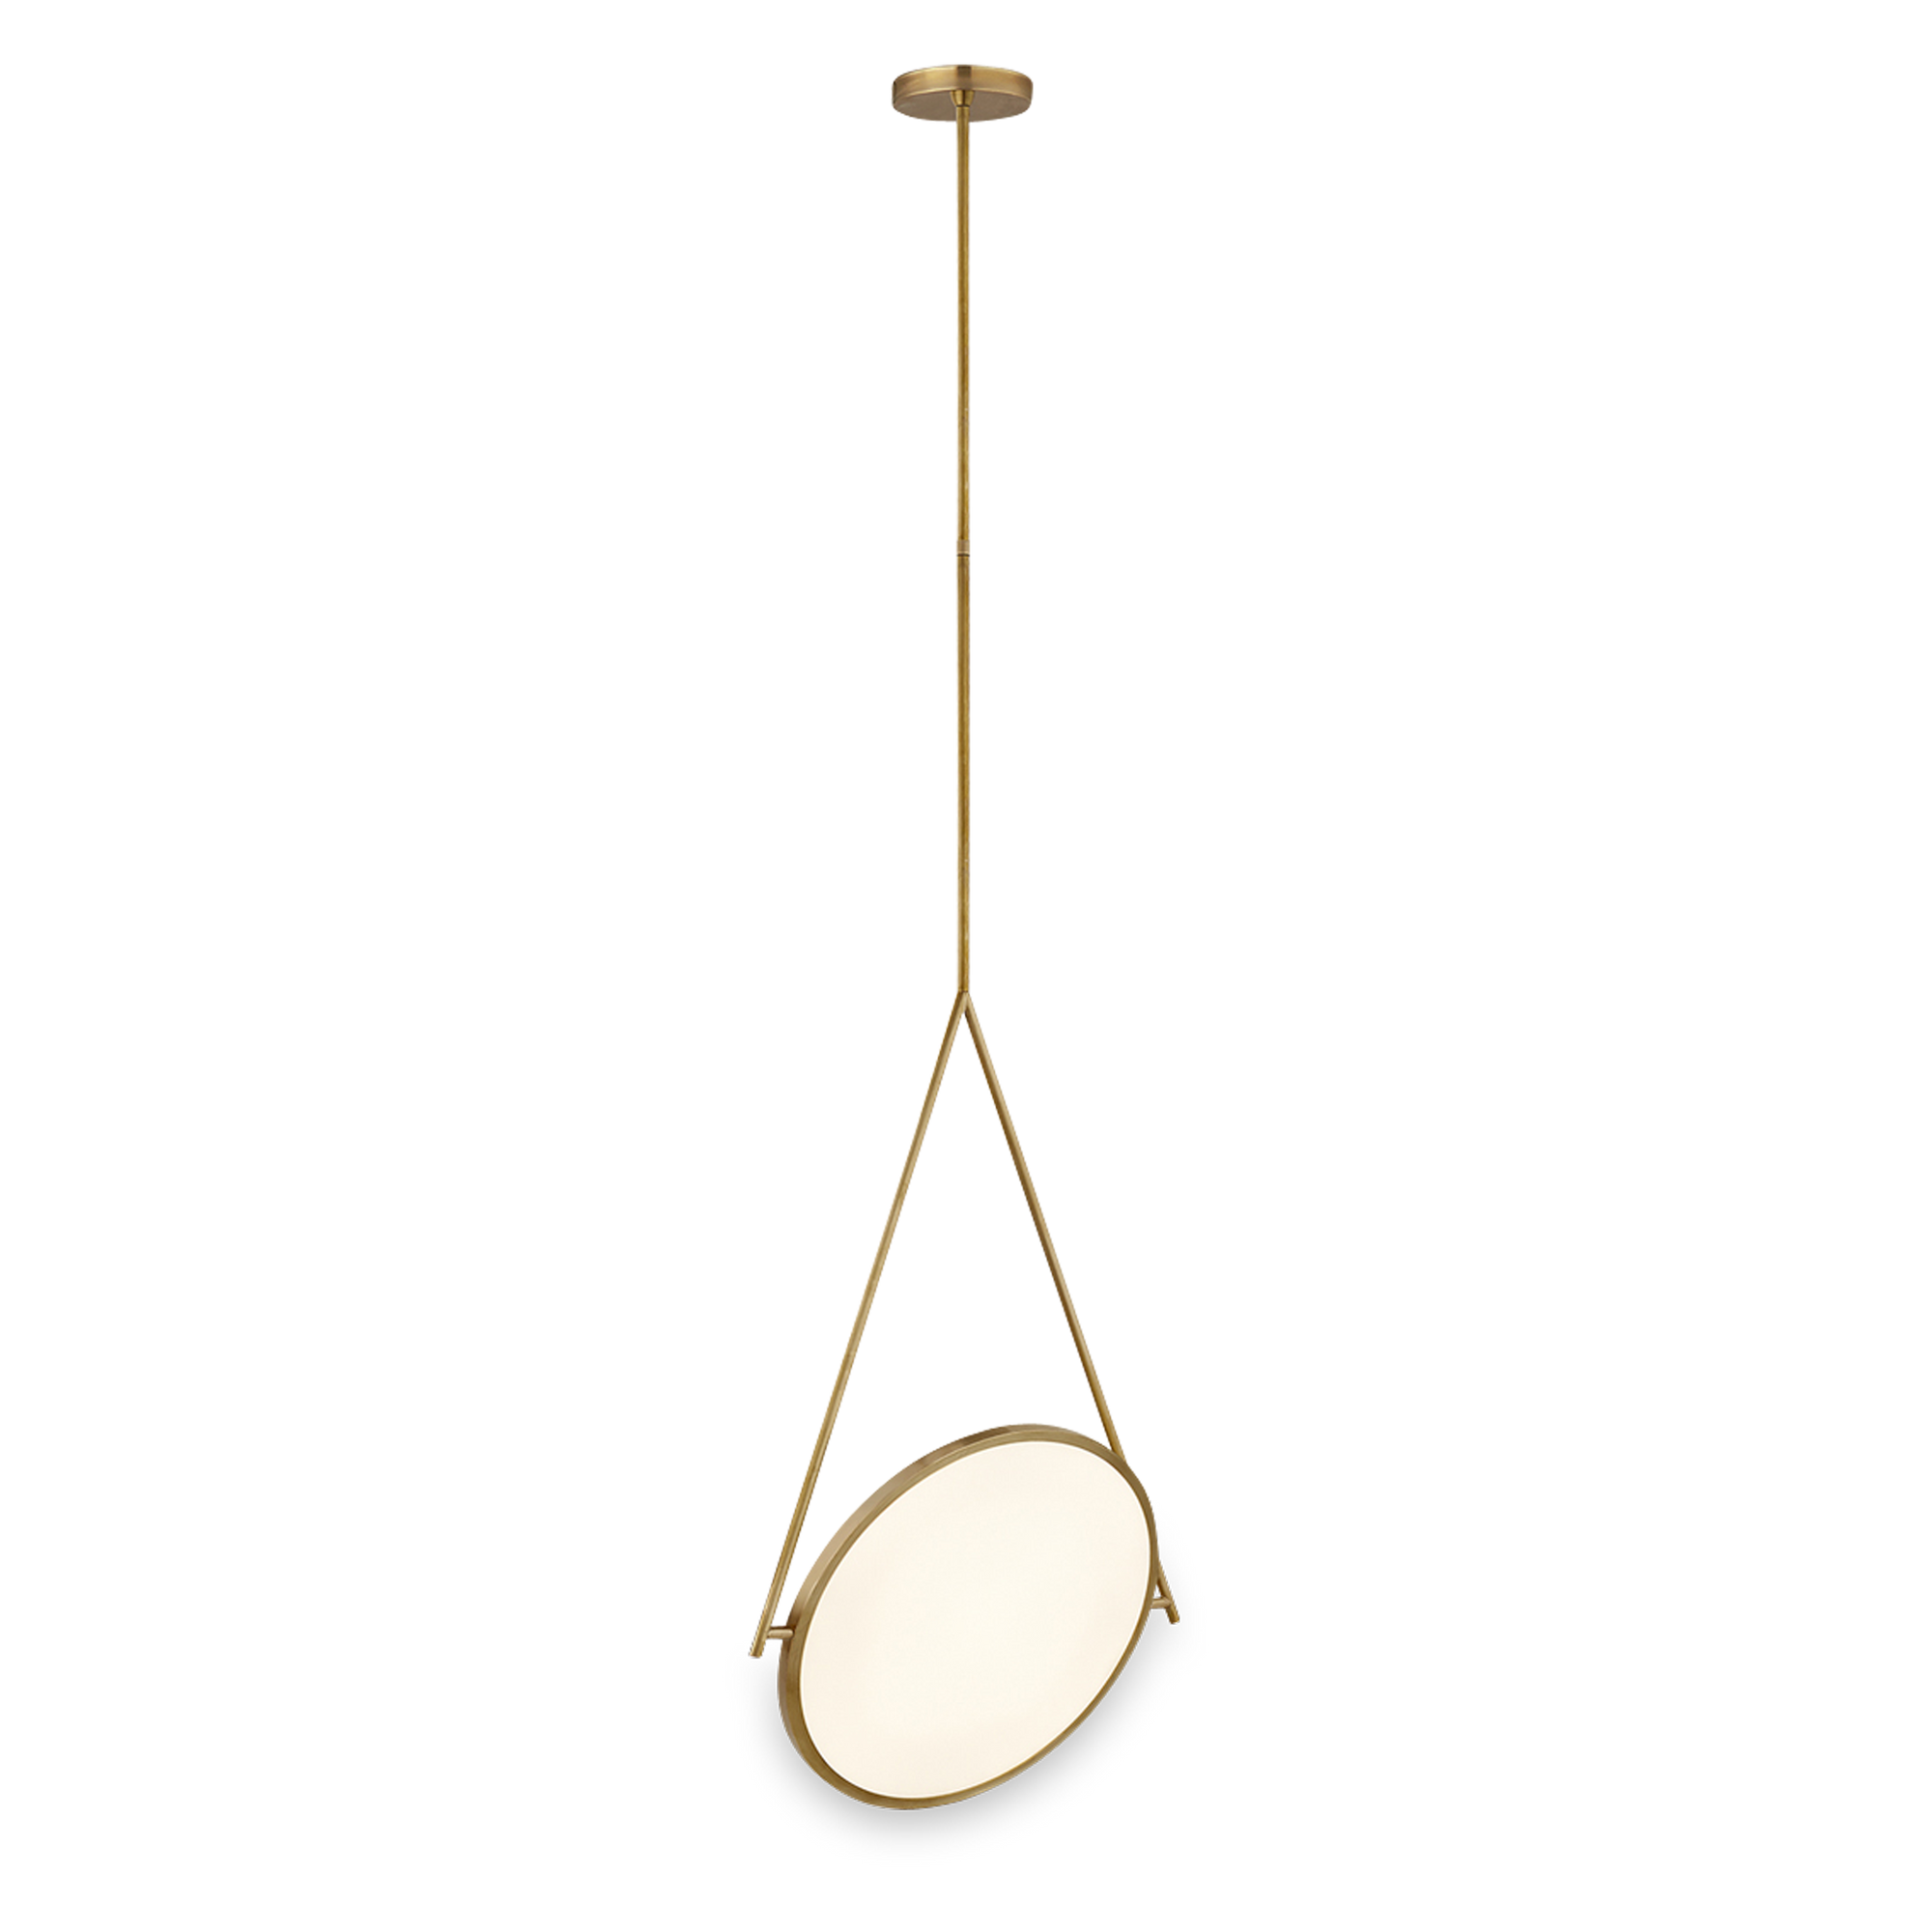 Blending form with function in a truly contemporary way, the Stance rotating pendant features sleek lines and a unique shape.